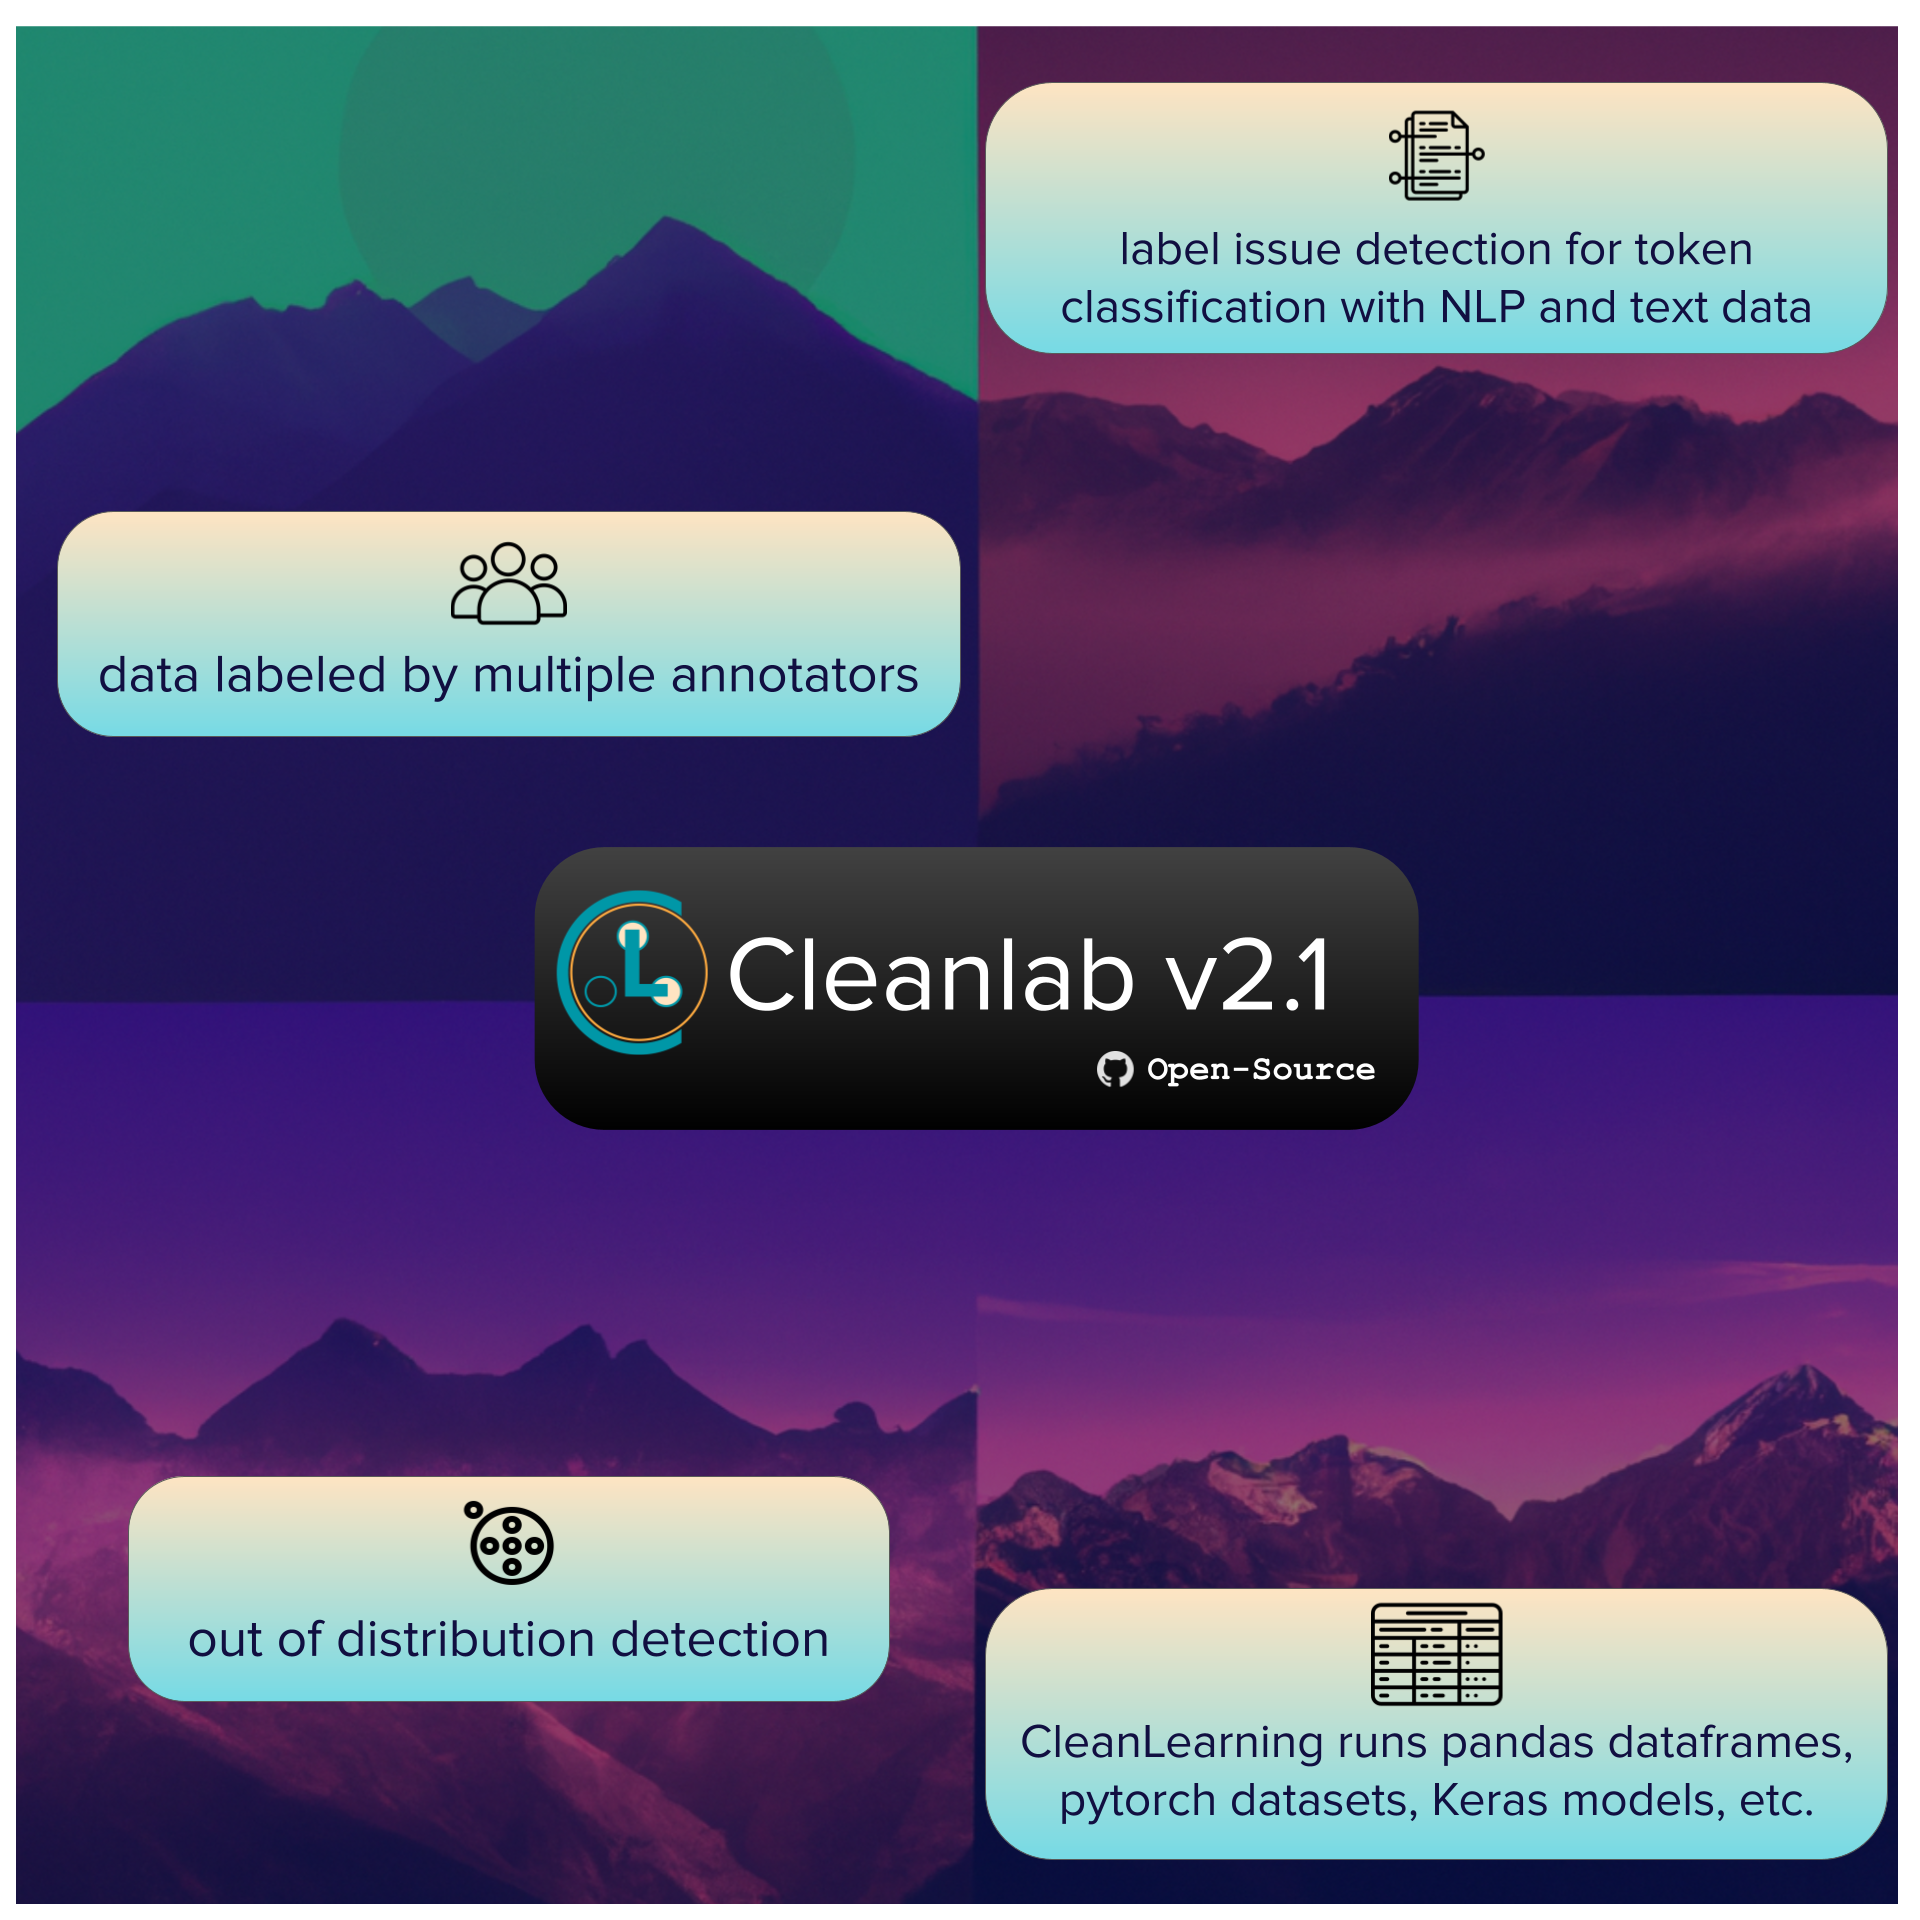 cleanlab v2.1 adds multi-annotator analysis, out of distribution detection, token classification, and CleanLearning support for: pandas, pytorch, tensorflow, keras, and many other data formats + models.